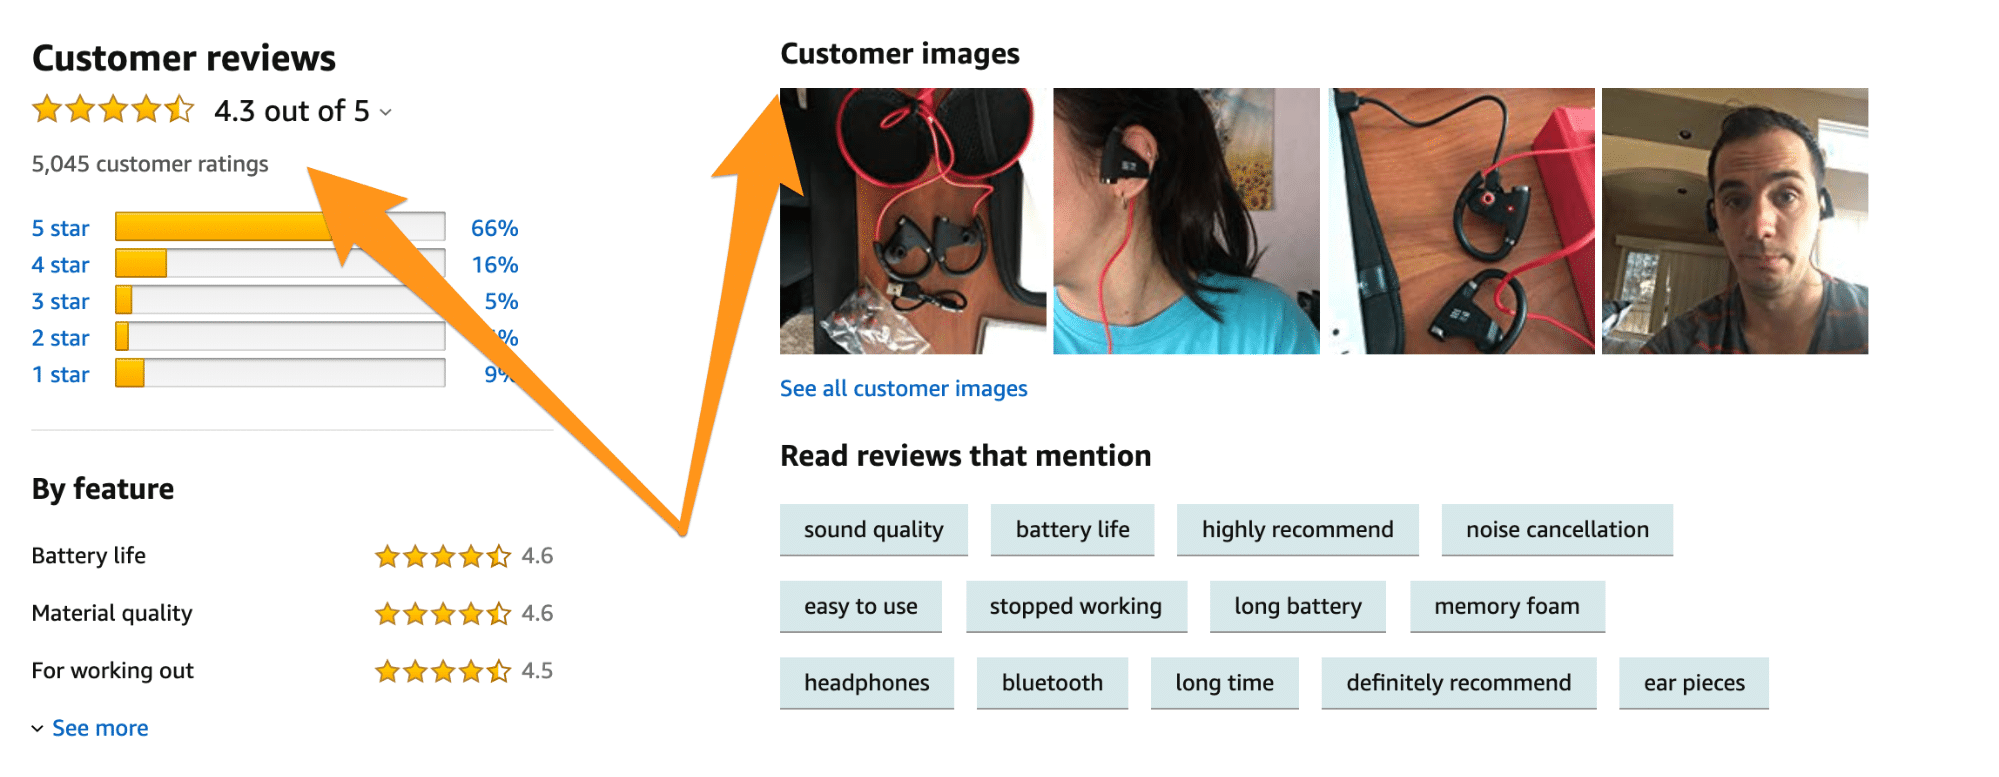 Customer reviews, like those on Amazon, are a great user-generated content strategy